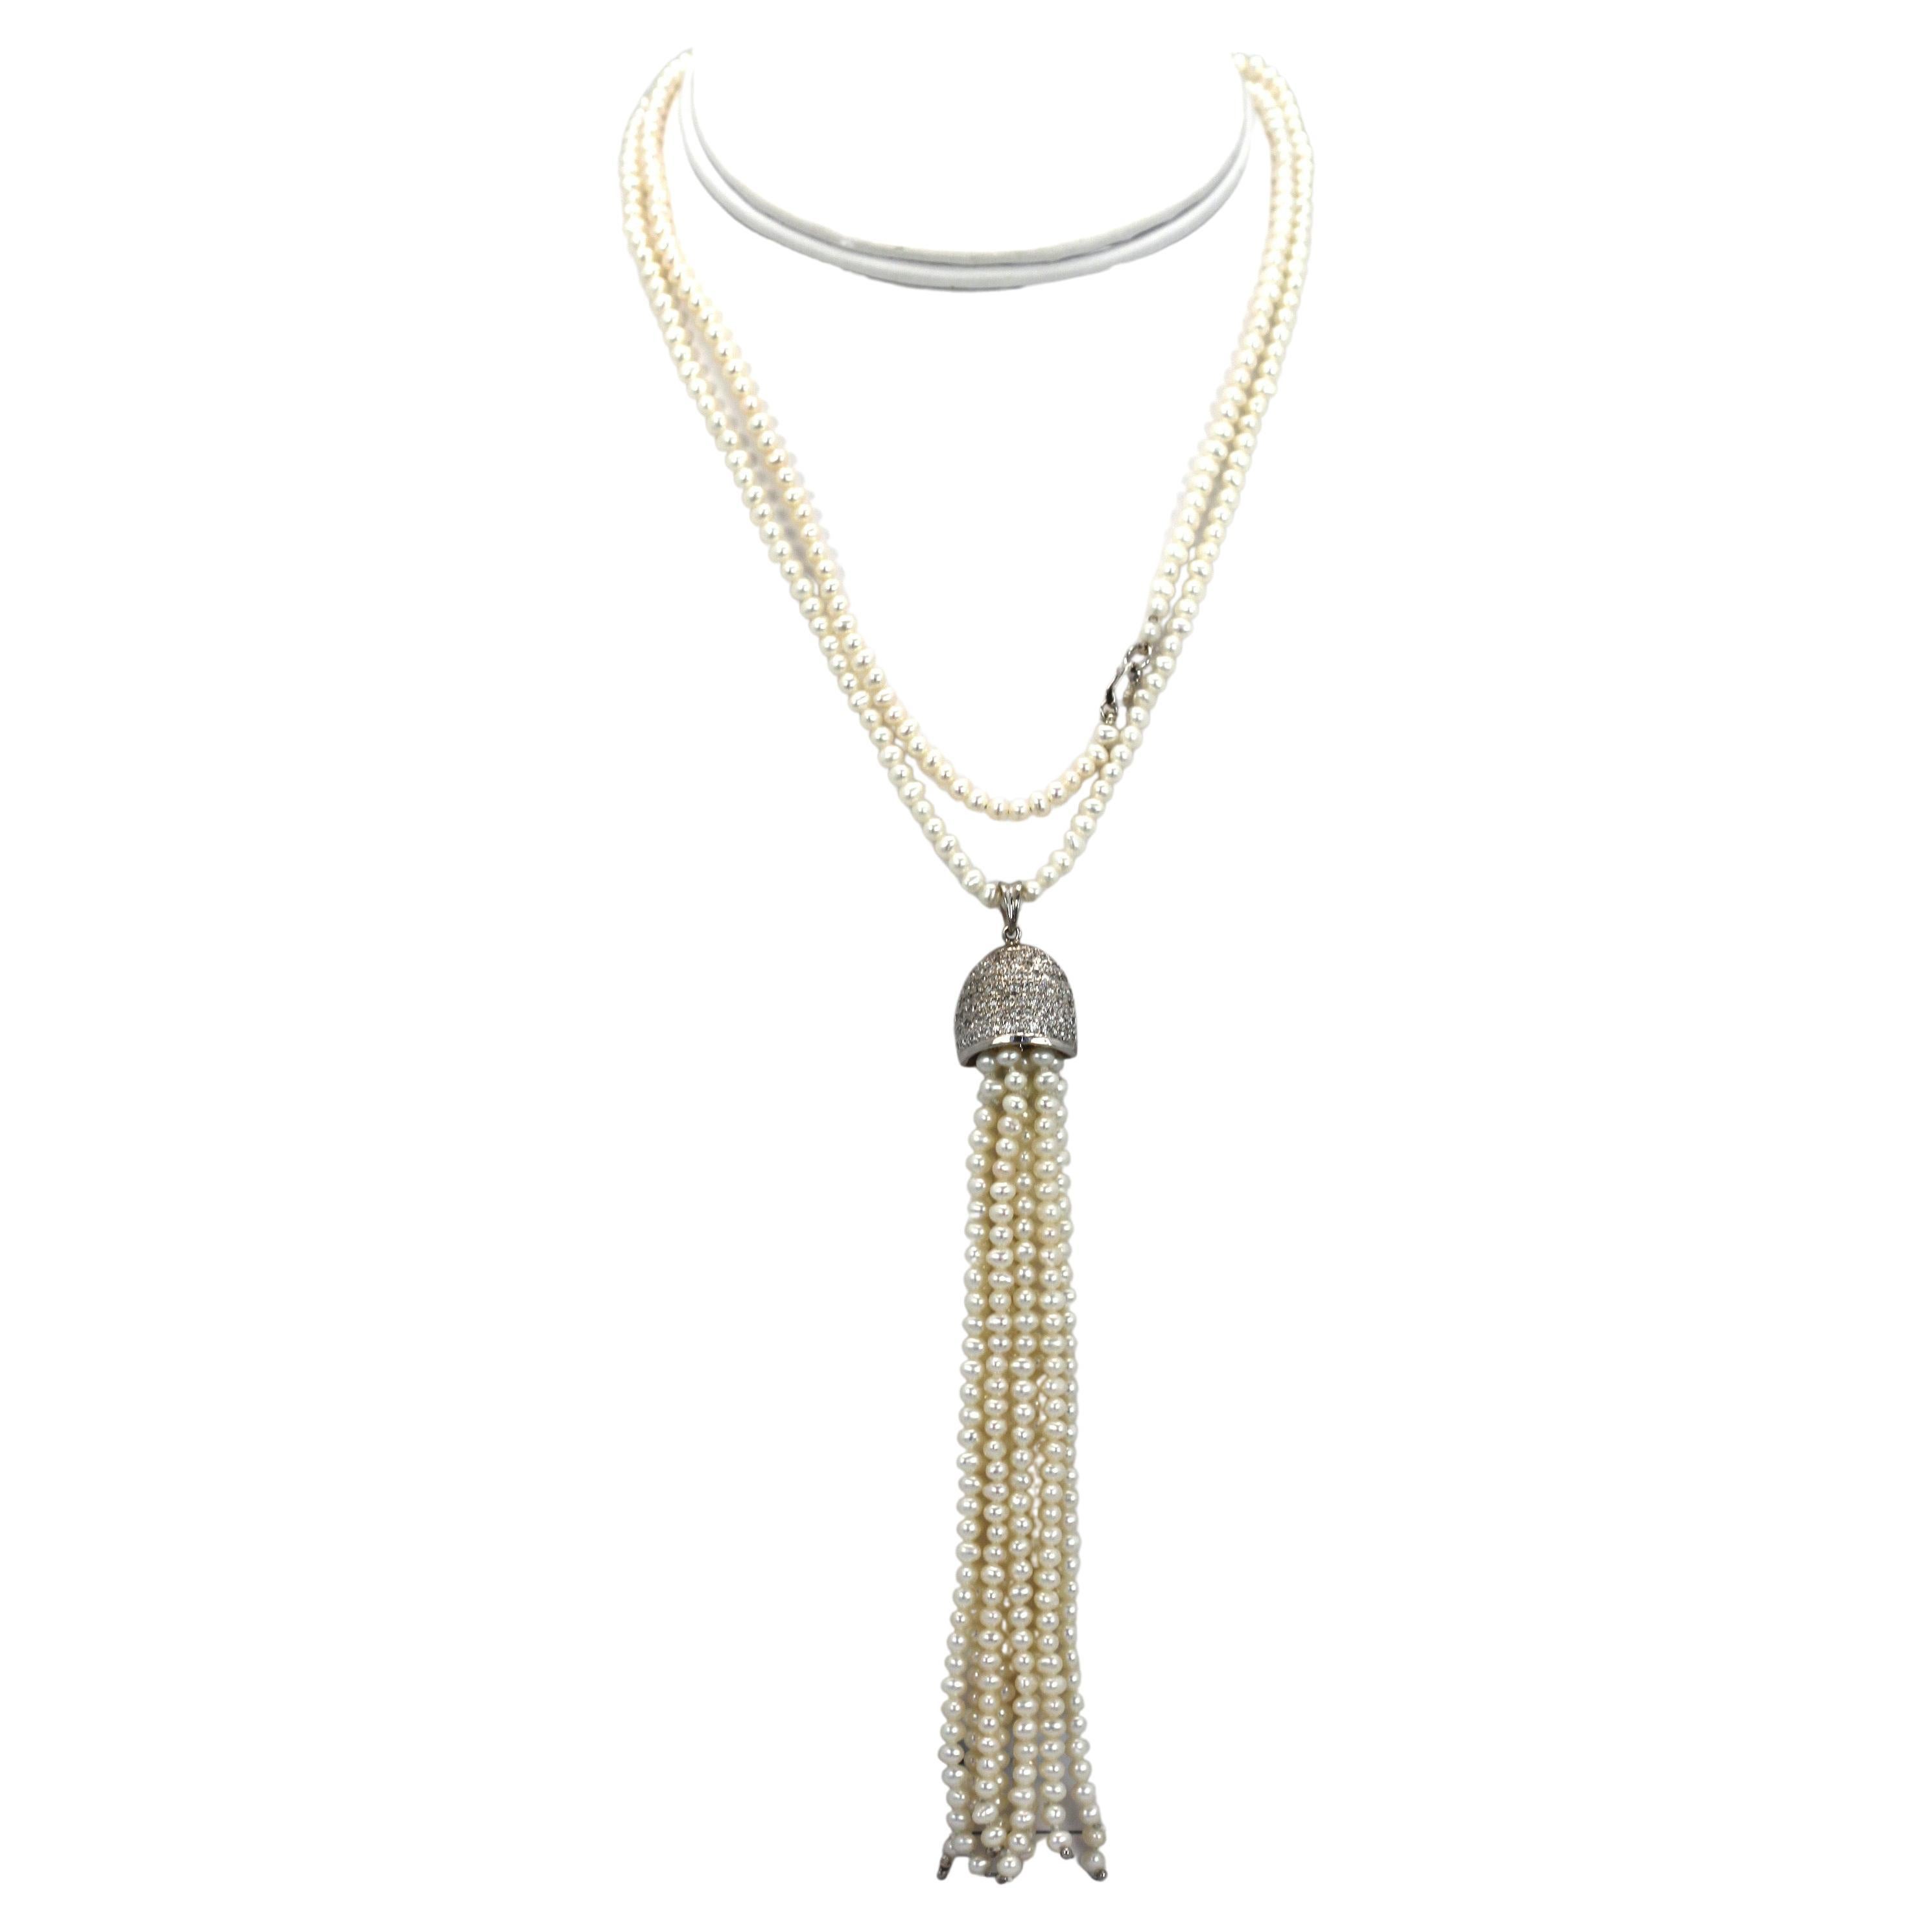 Seed Pearl Necklace with 4 1/2" Pearl Tassel 18K WG 32"L For Sale